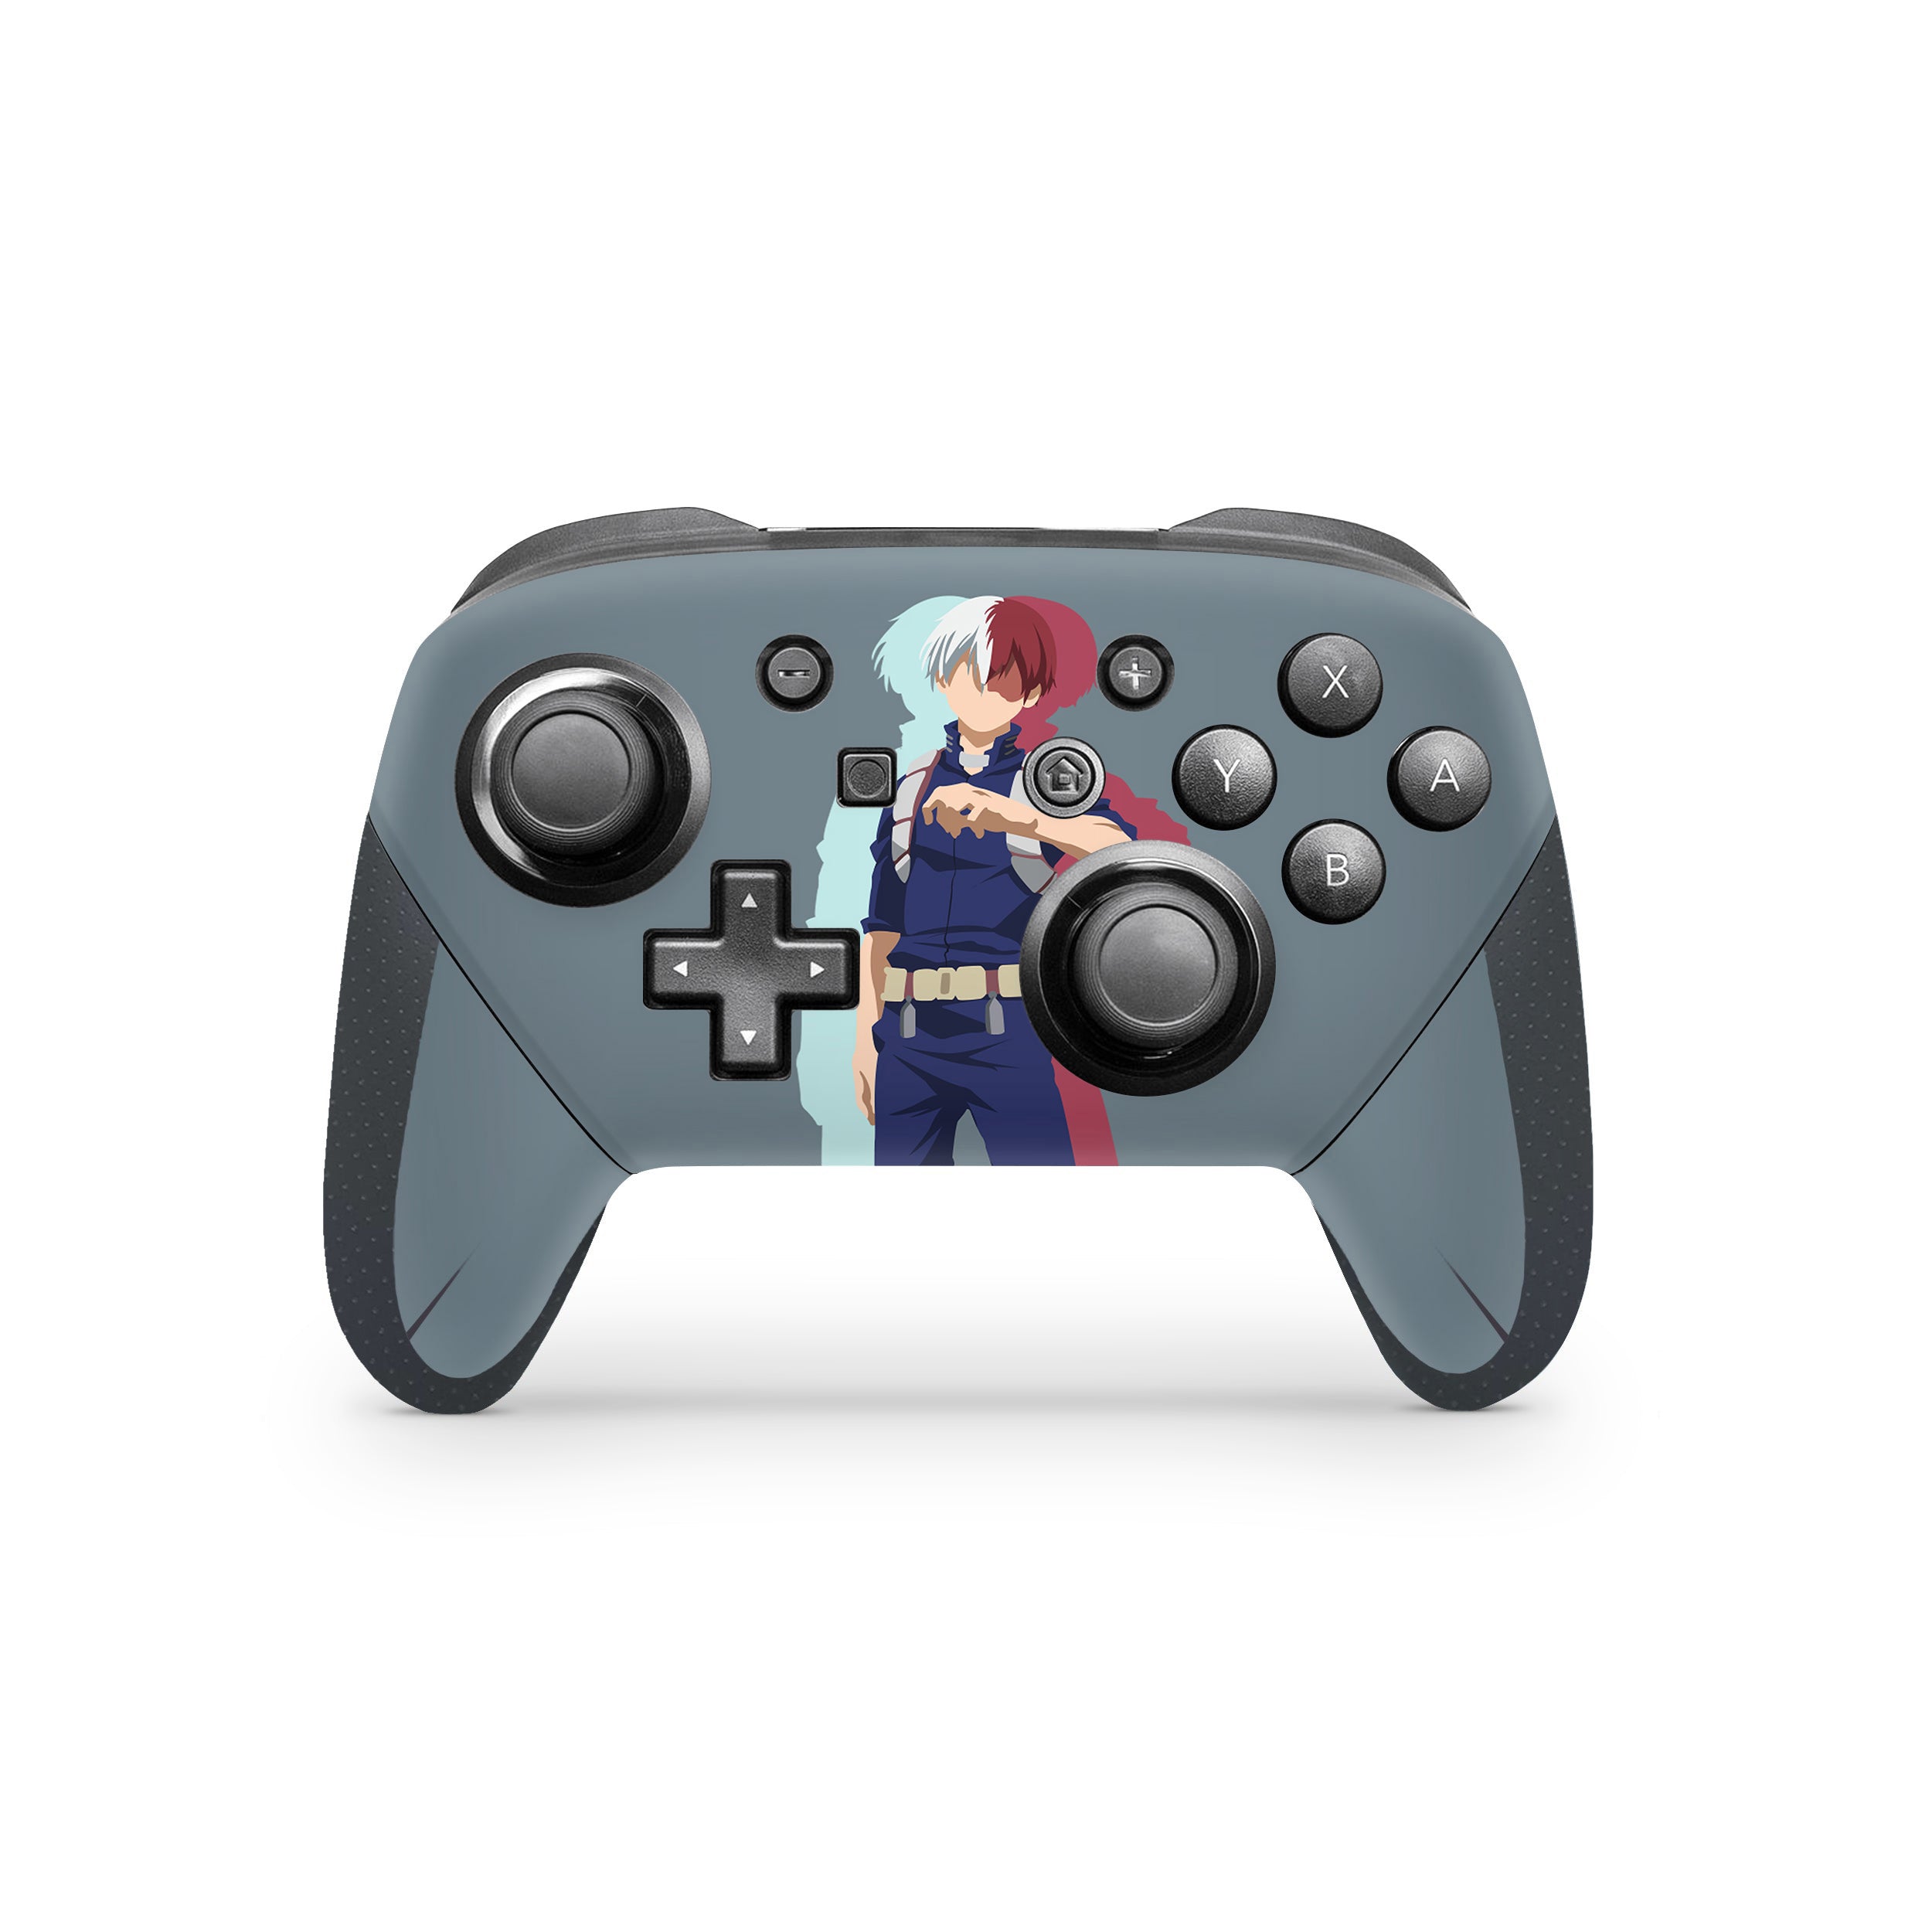 A video game skin featuring a My Hero Academia Shoto Todoroki design for the Switch Pro Controller.